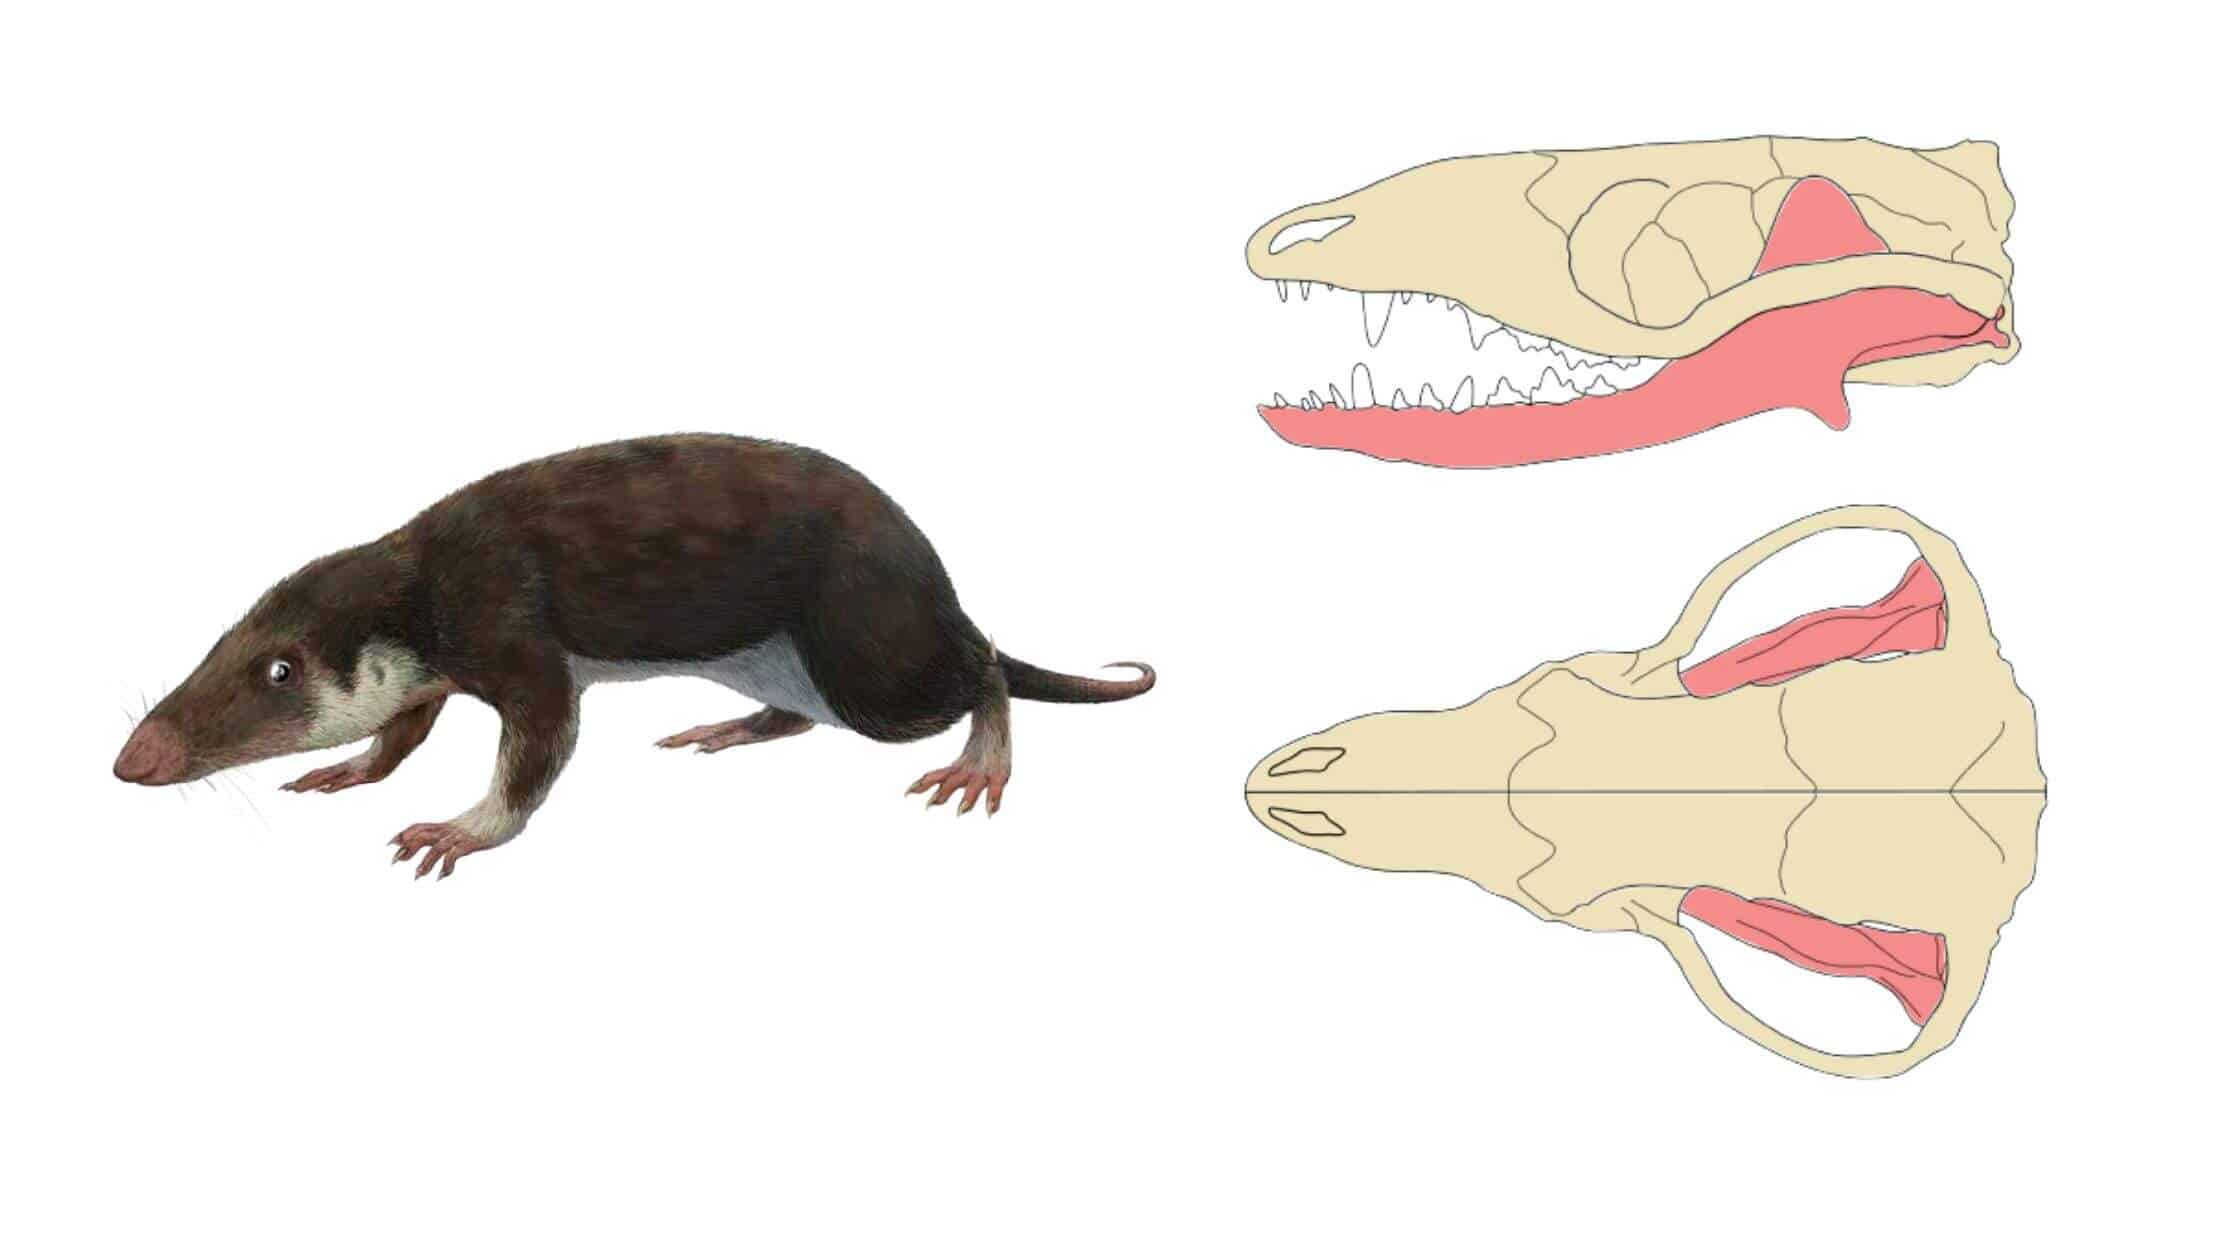 The Ancient Rodent Morganucodon Is The Ancestor Of All Mammals